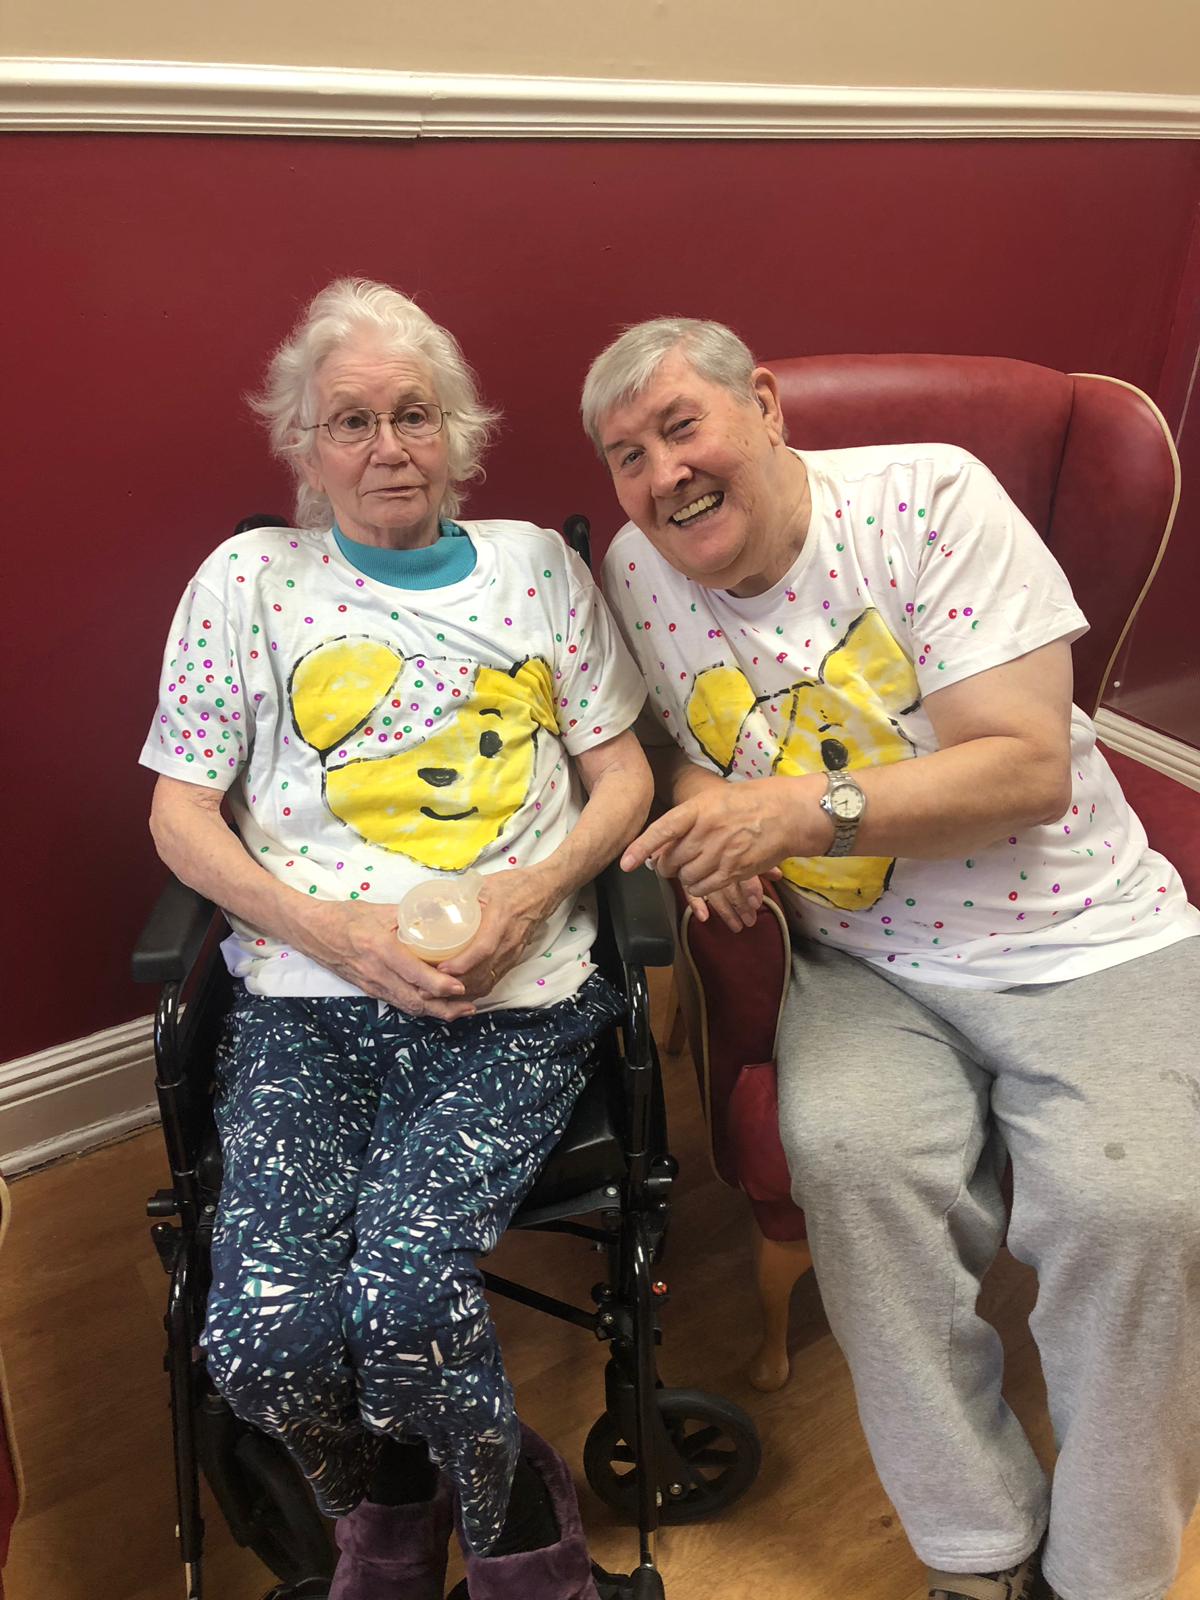 Children In Need 7: Key Healthcare is dedicated to caring for elderly residents in safe. We have multiple dementia care homes including our care home middlesbrough, our care home St. Helen and care home saltburn. We excel in monitoring and improving care levels.